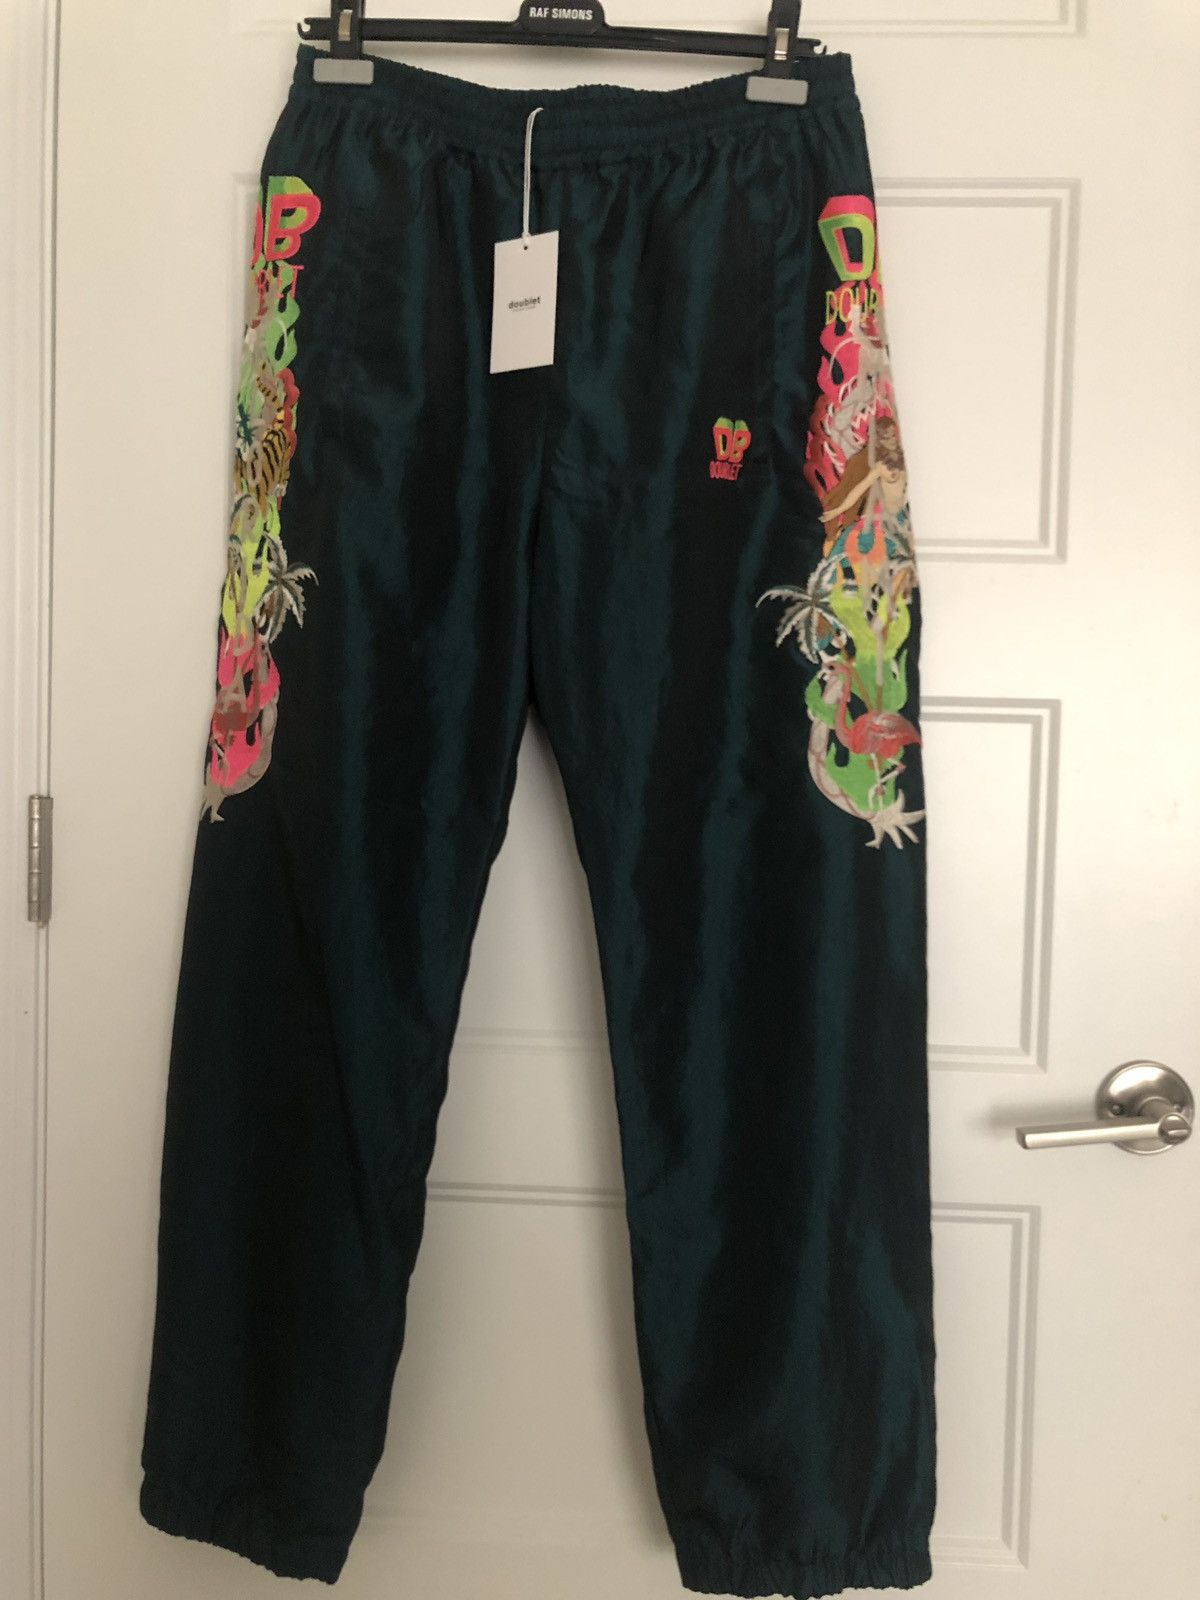 Doublet doublet 19ss chaos embroidery chambray pants size m | Grailed